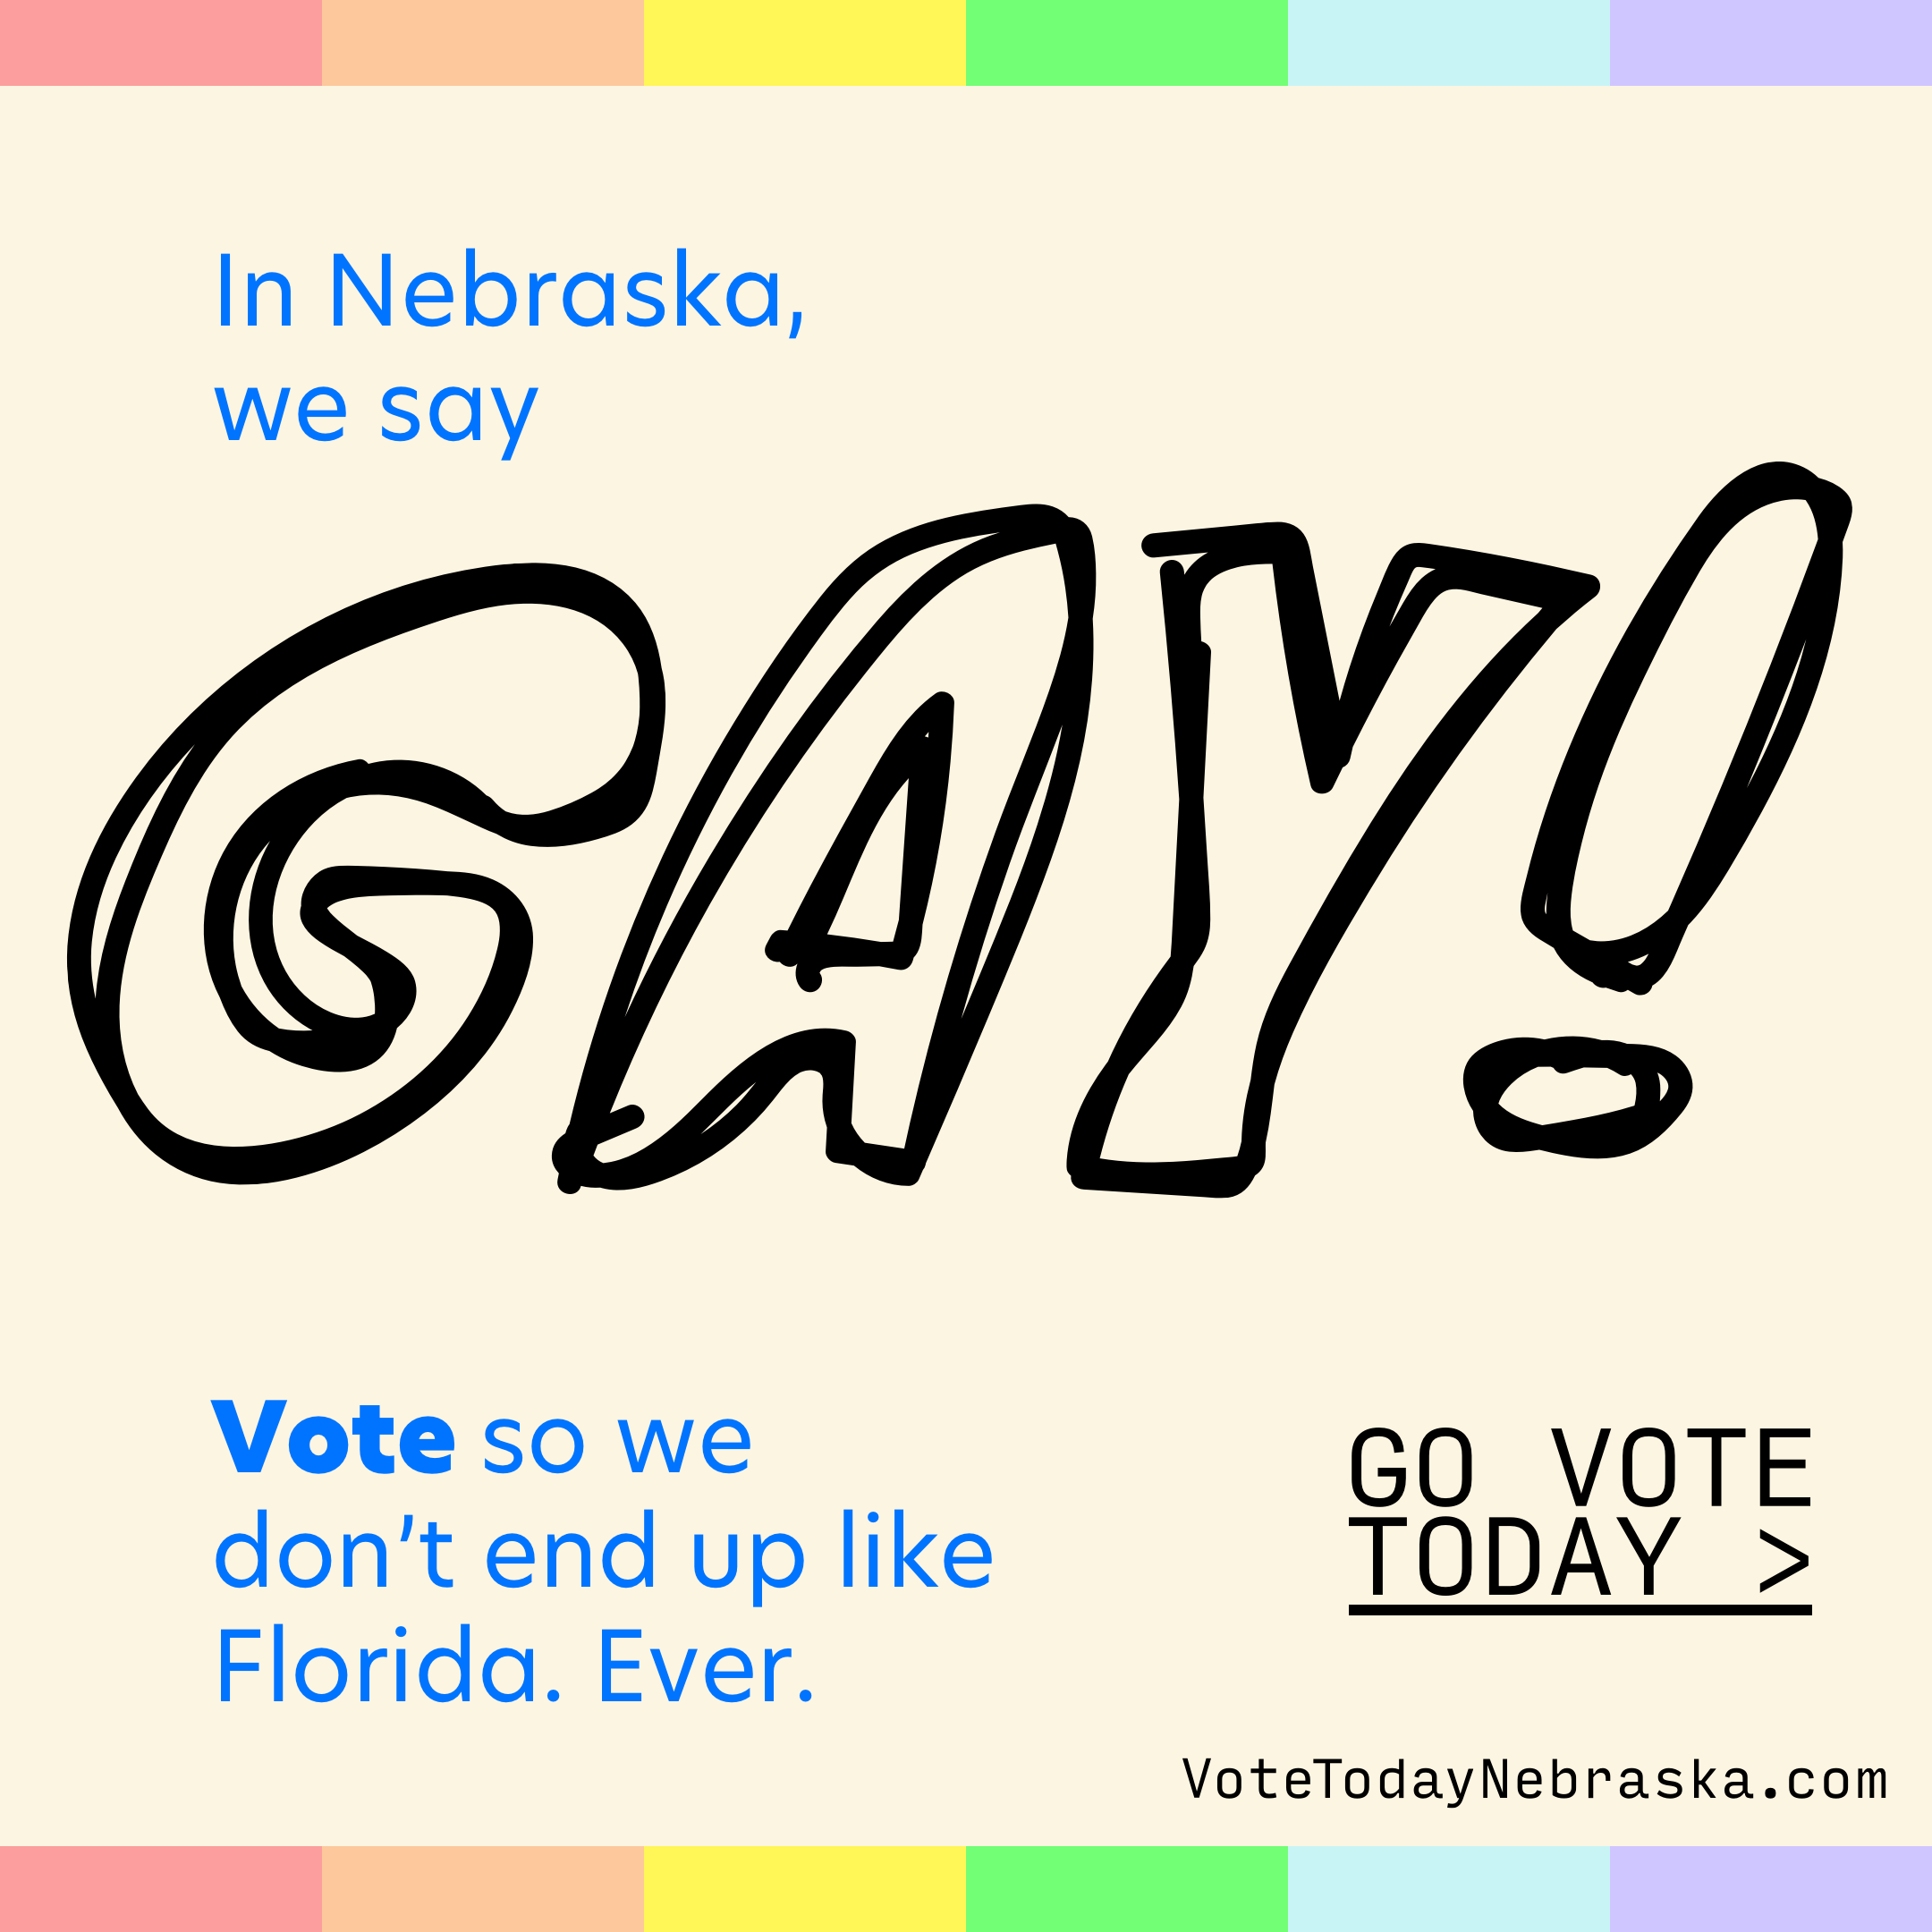 In Nebraska we say gay! Vote so we don't end up like Florida. Ever.